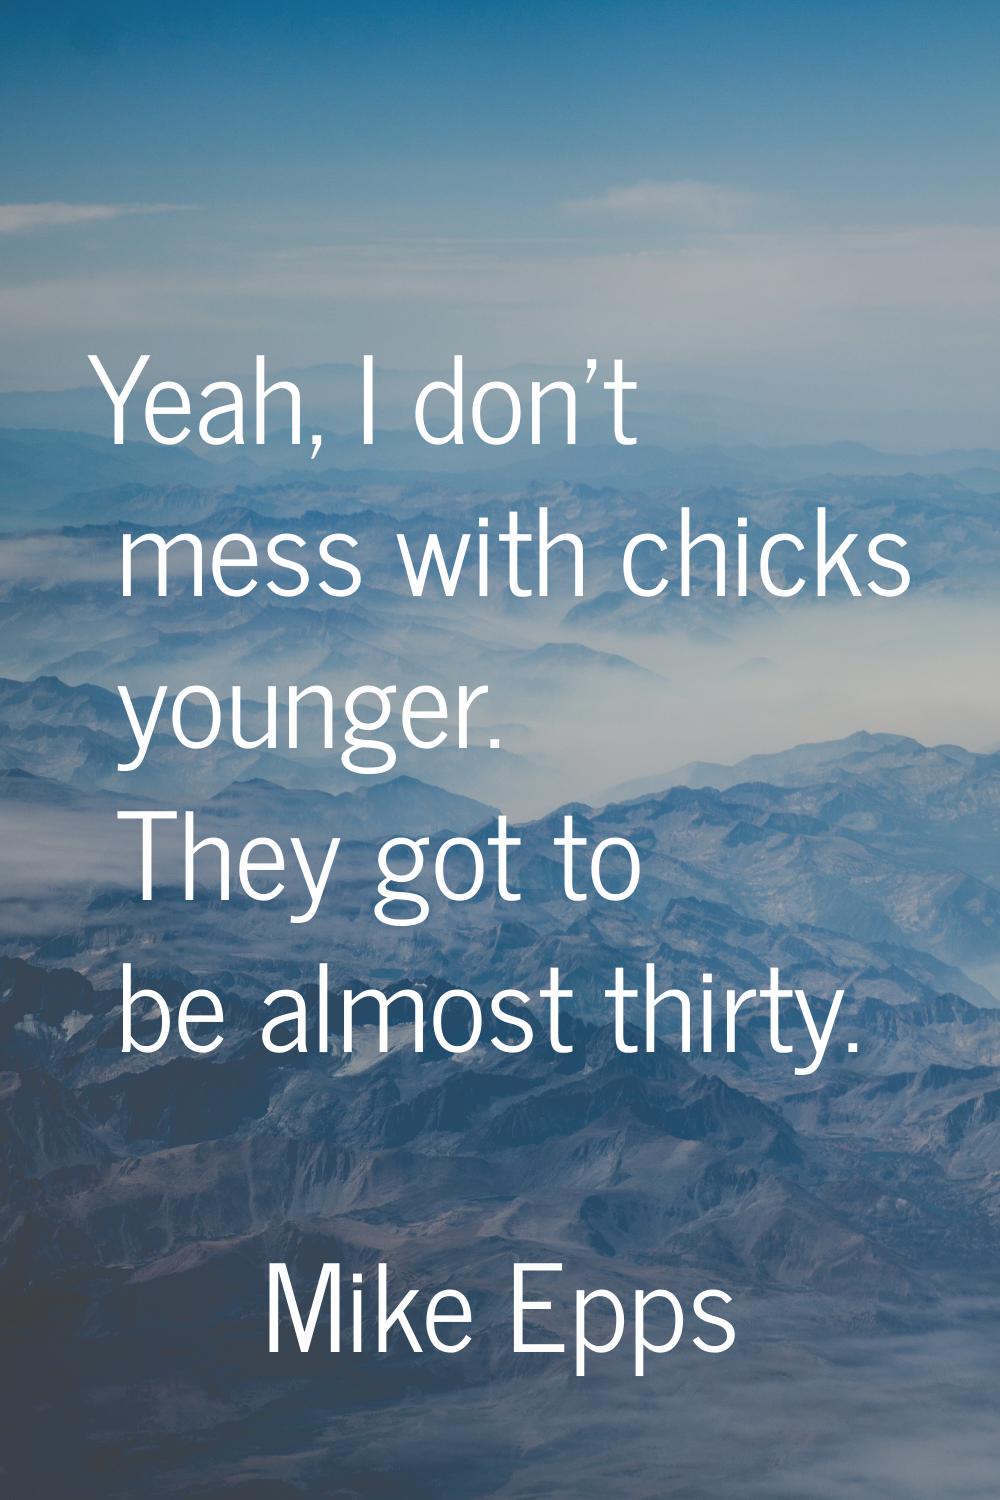 Yeah, I don't mess with chicks younger. They got to be almost thirty.